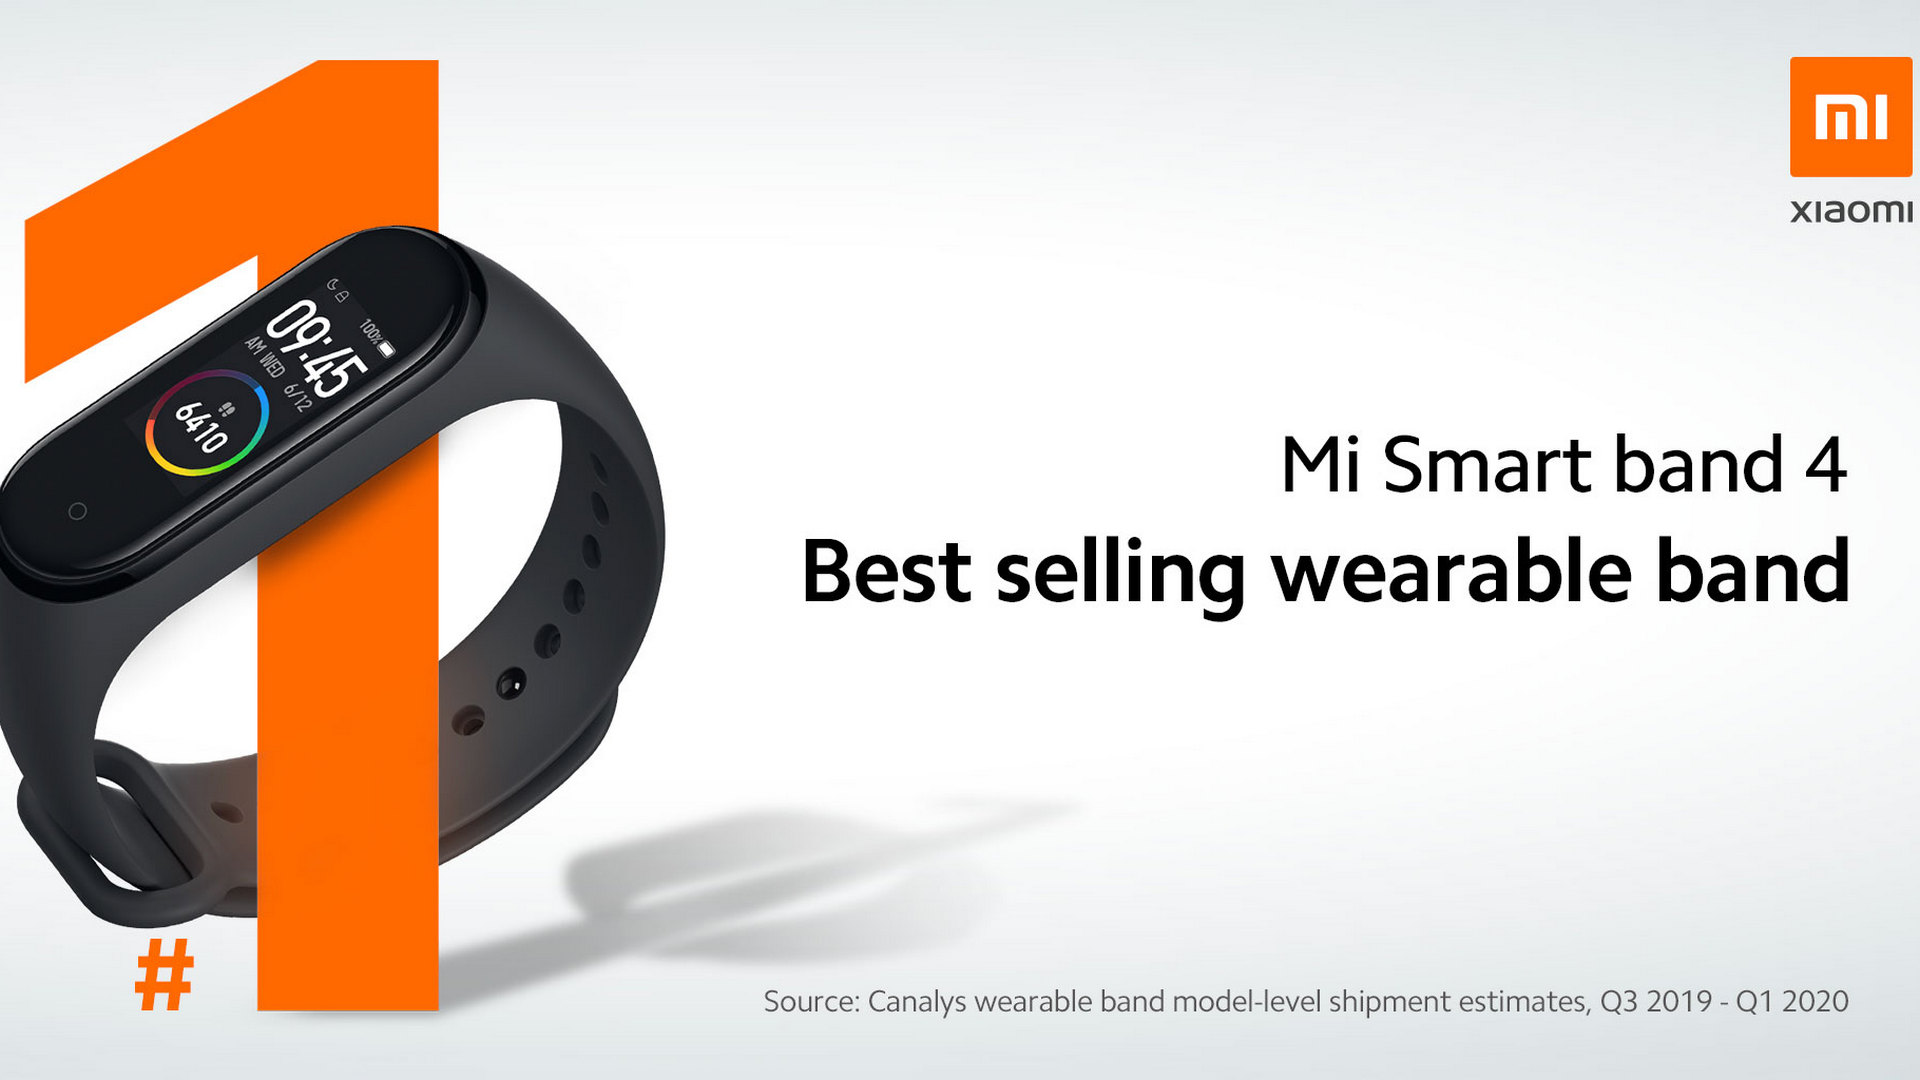 Xiaomi Mi Band 4 is the best-selling smartband in the world 